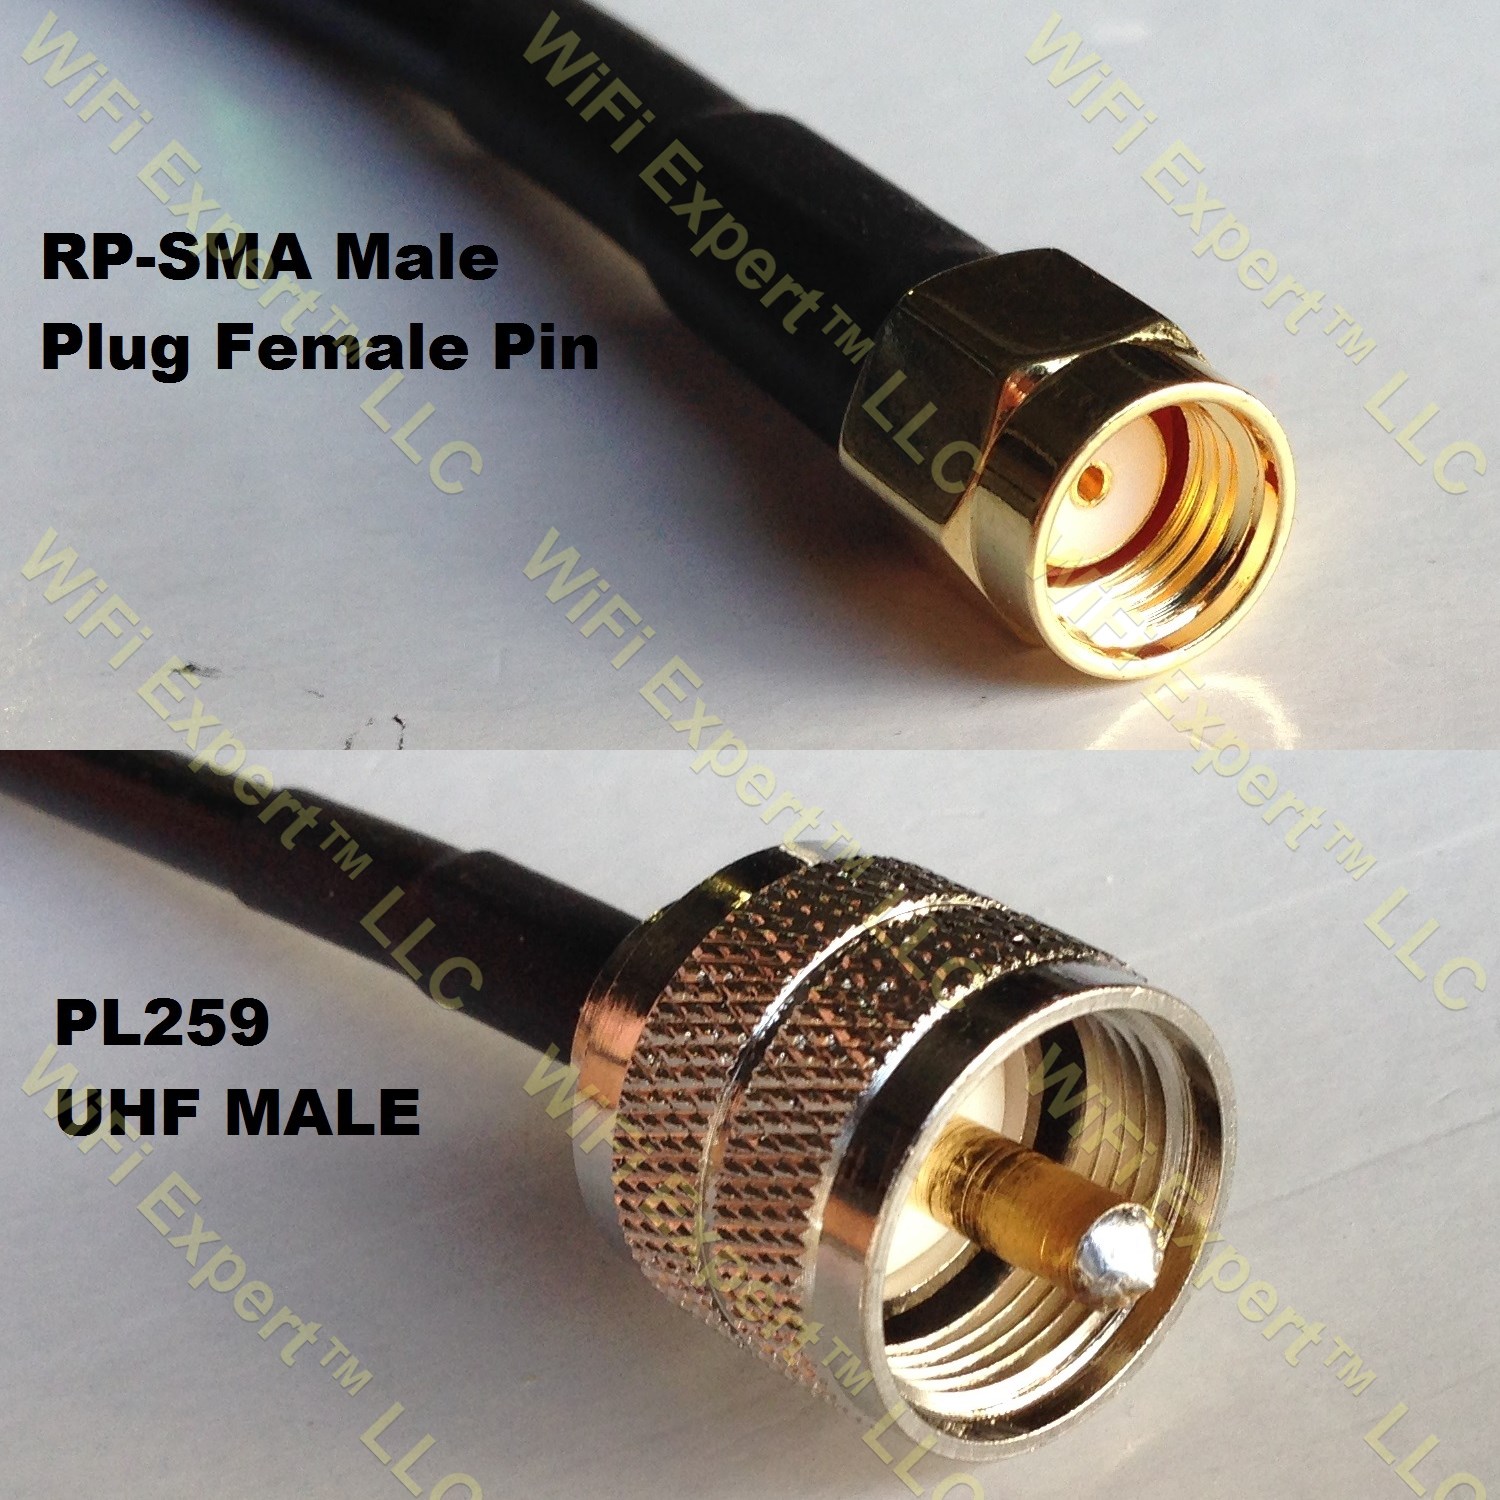 TIMES® LMR240 SMA MALE to PL259 UHF MALE Coaxial RF Pigtail Cable USA 